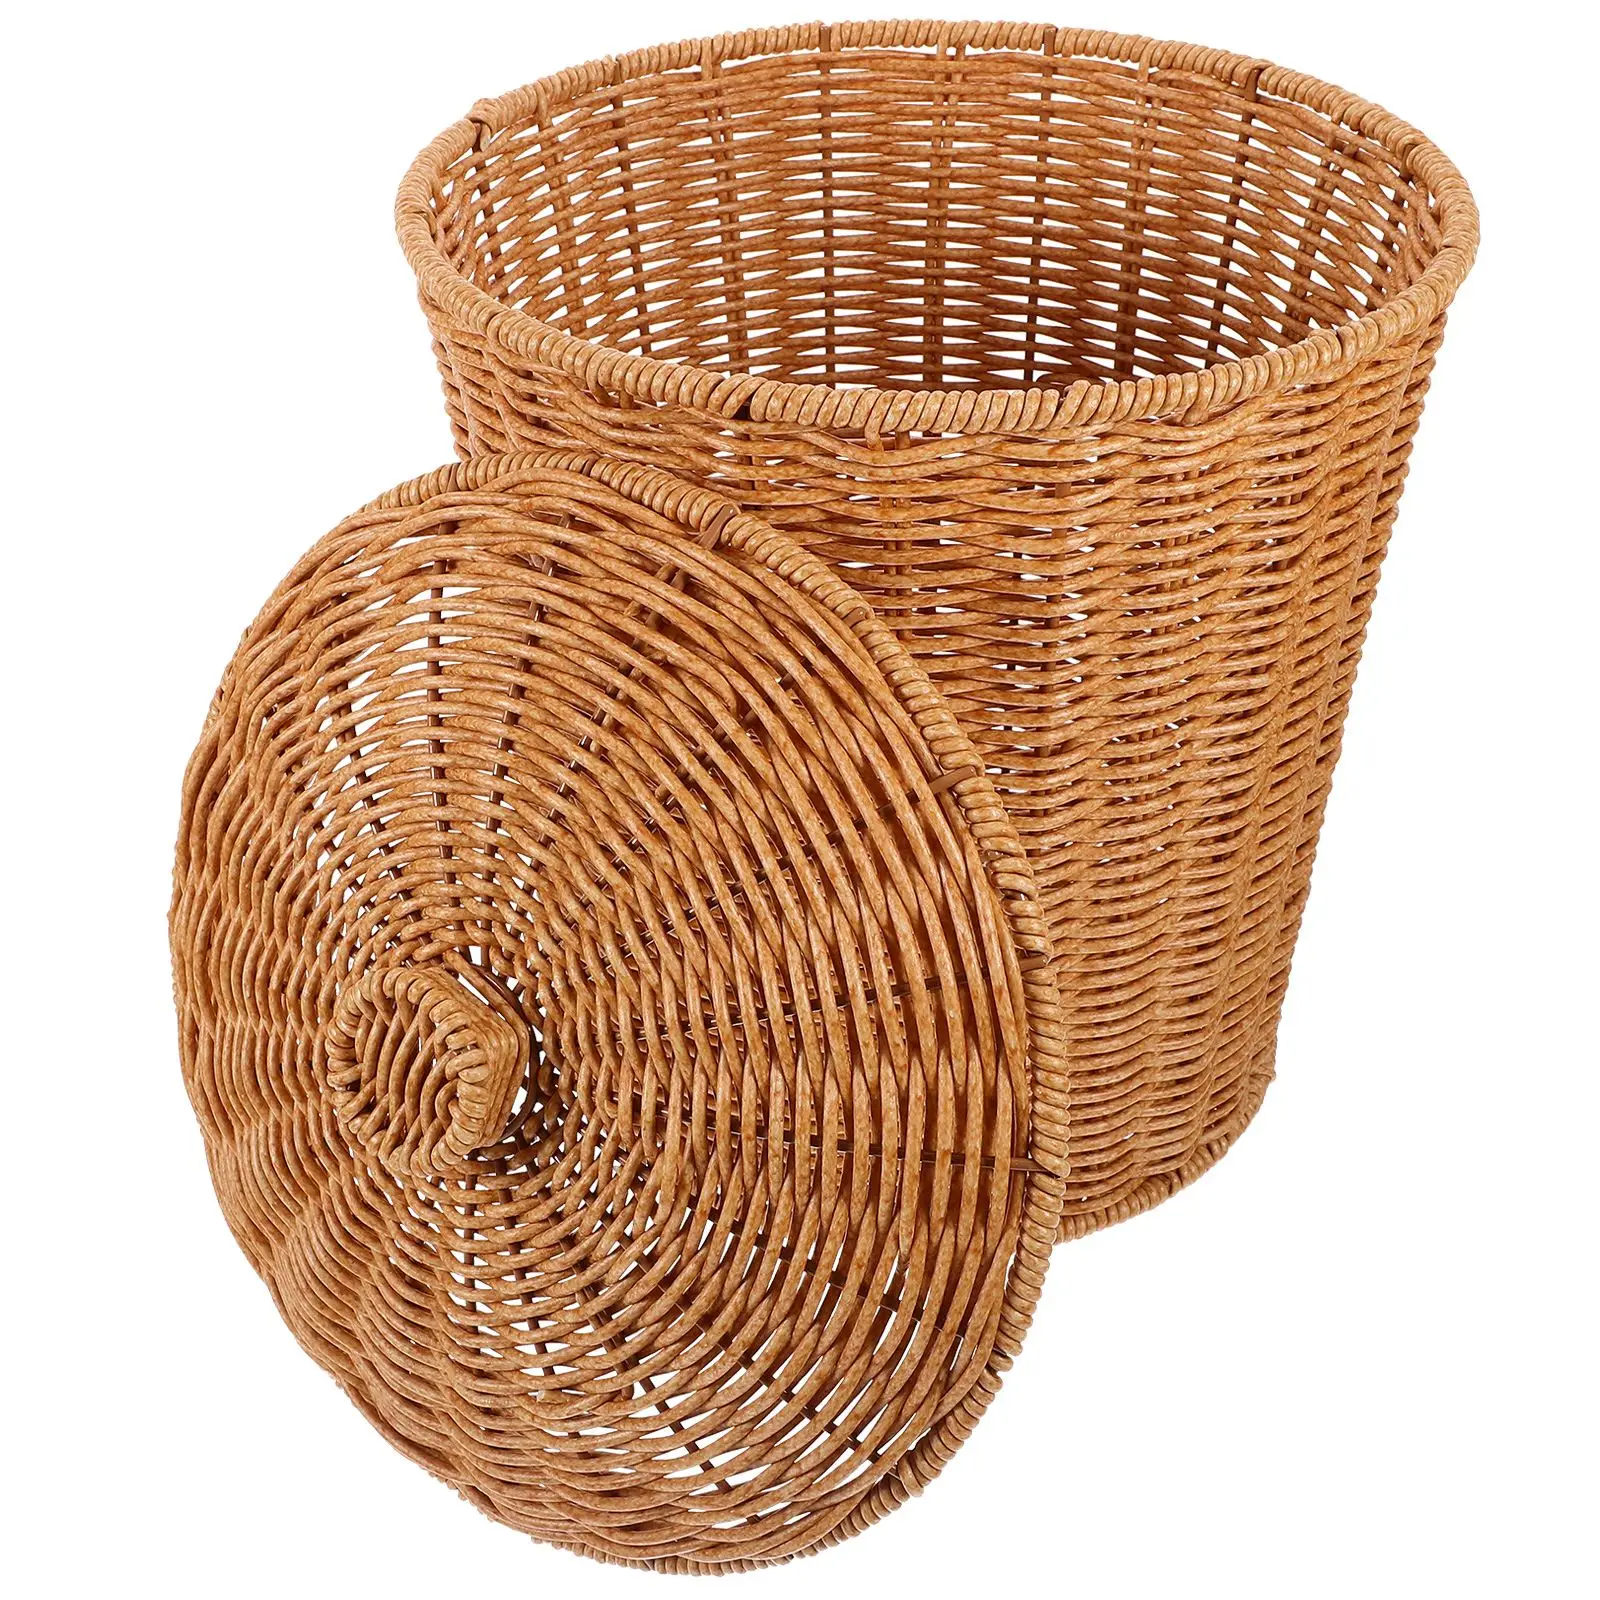 

Laundry Baskets Handheld Sundries Baskets Portable Dirty Clothes Large Trash Cans With Lid Bucket Vine Woven Garbage Bin With